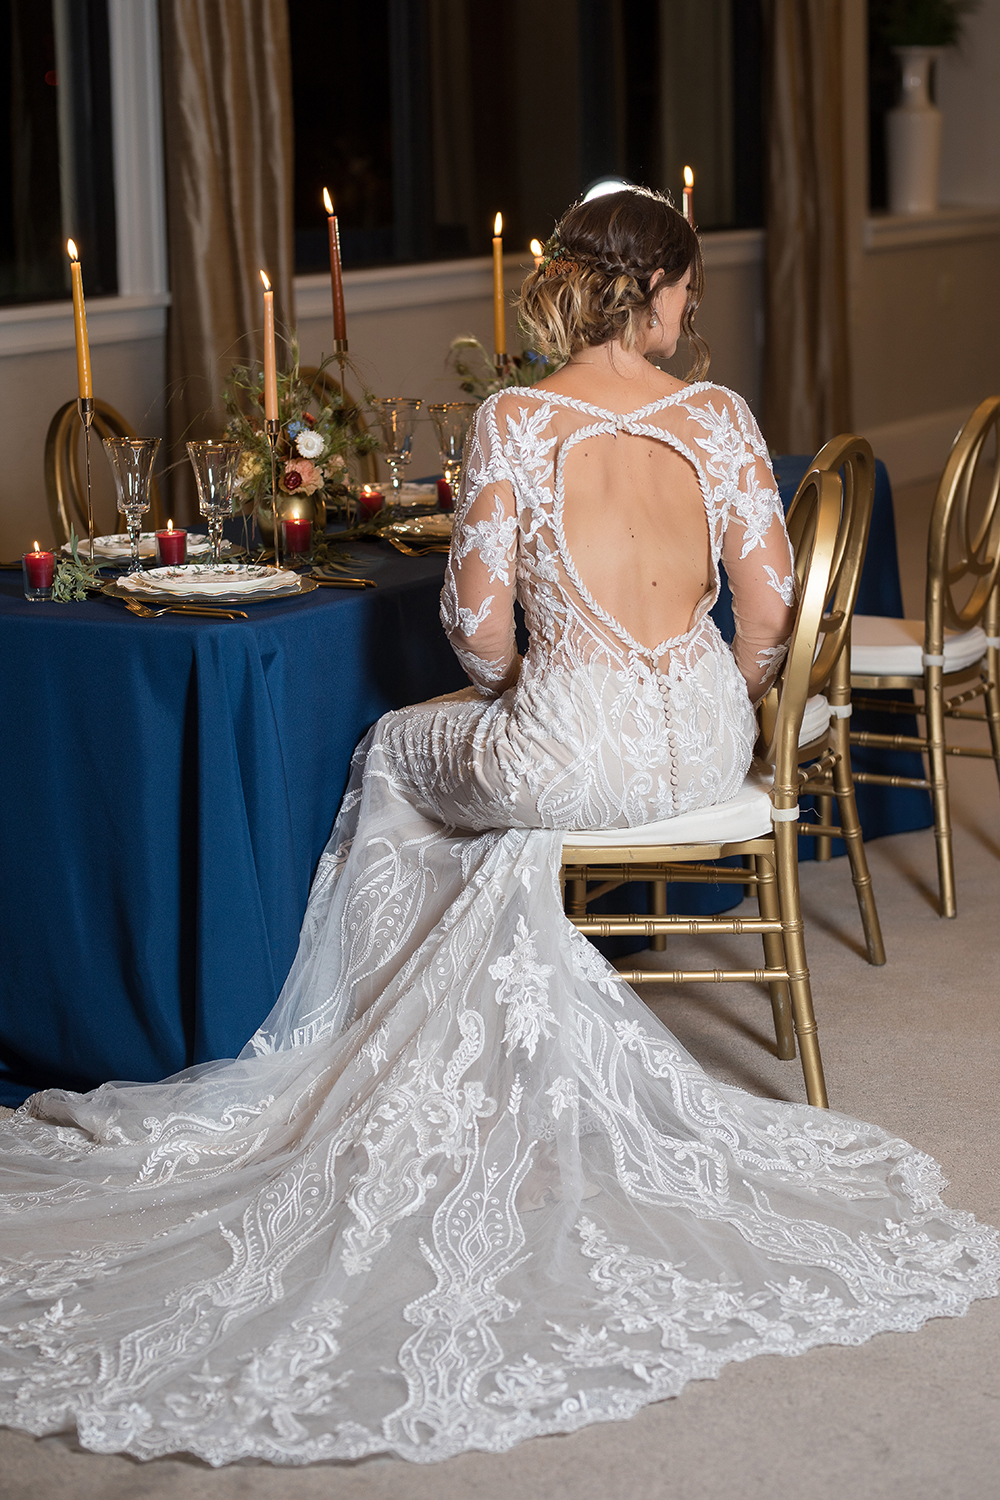 Evie is wearing a graphic lace fit-and-flare wedding dress with illusion sleeves from MaeMe The Bridal Boutique. Scrolling patterns and ornate structures shape and sculpt the figure, from the narrowed plunge of the V-neckline to the sheer cutouts along the sides and back. A clasp a the top of the back creates a wide keyhole opening, framed with organic floating laces to complete this head-turning look.